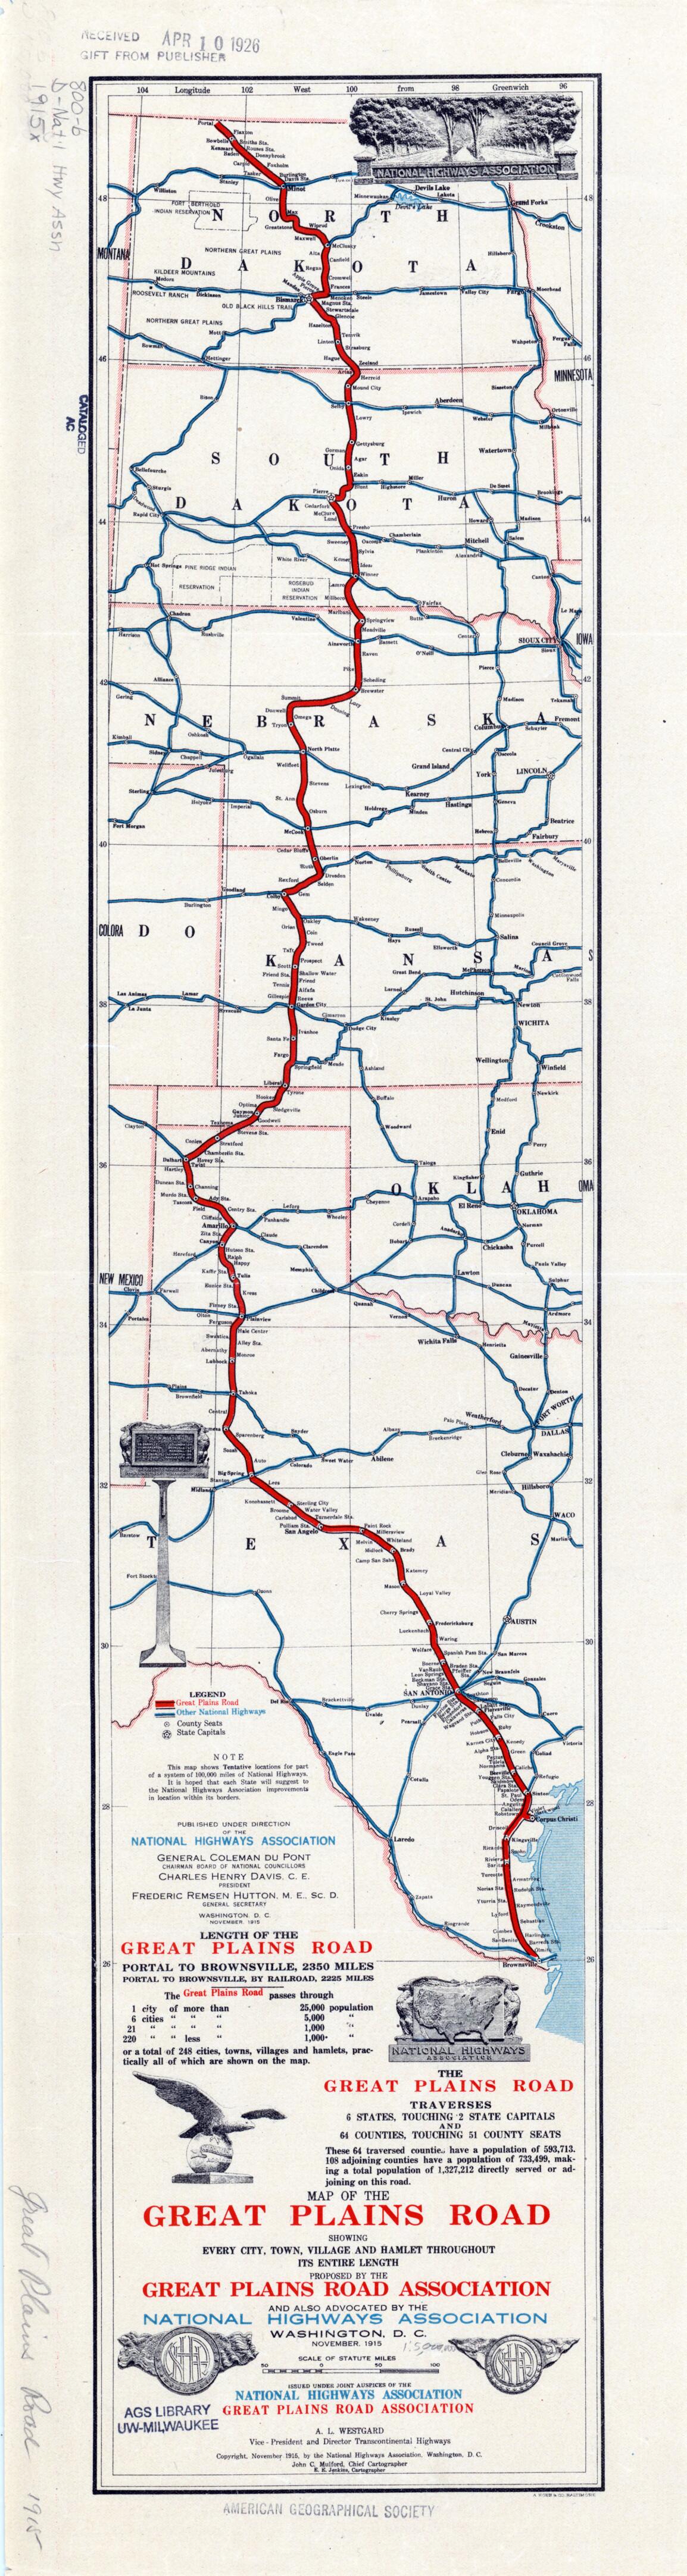 This old map of Map of the Great Plains Road. (Map of the Great Plains Road: Showing Every City, Town, Village and Hamlet Throughout Its Entire Length) from 1915 was created by  A. Hoen and Company,  Great Plains Road Association, E. E. Jenkins, John C. 